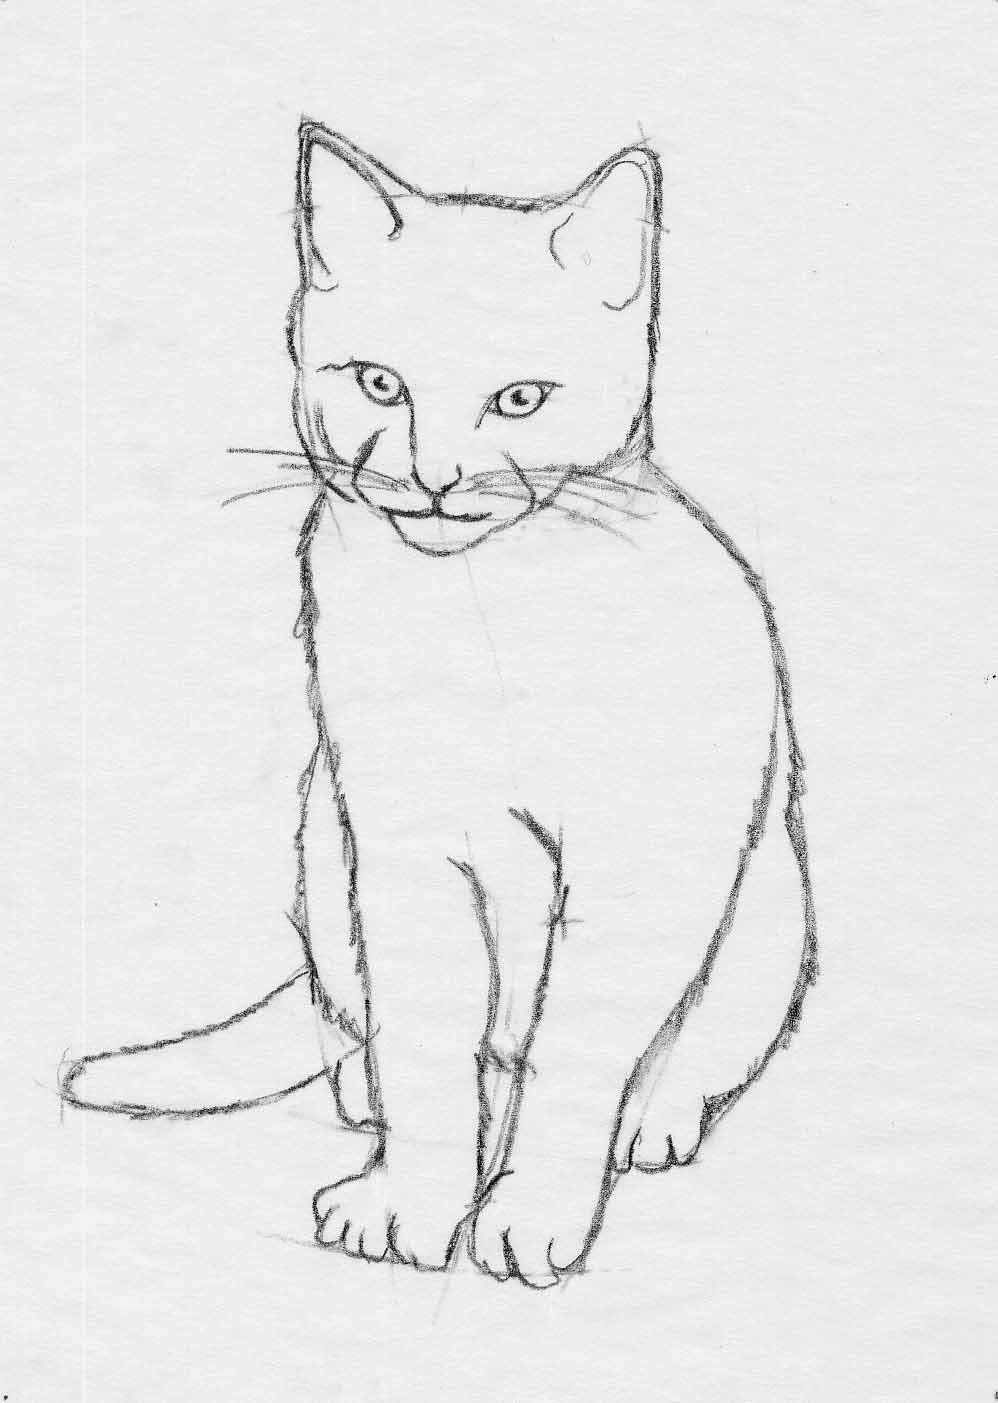 How to Draw Step-By-Step: Cats